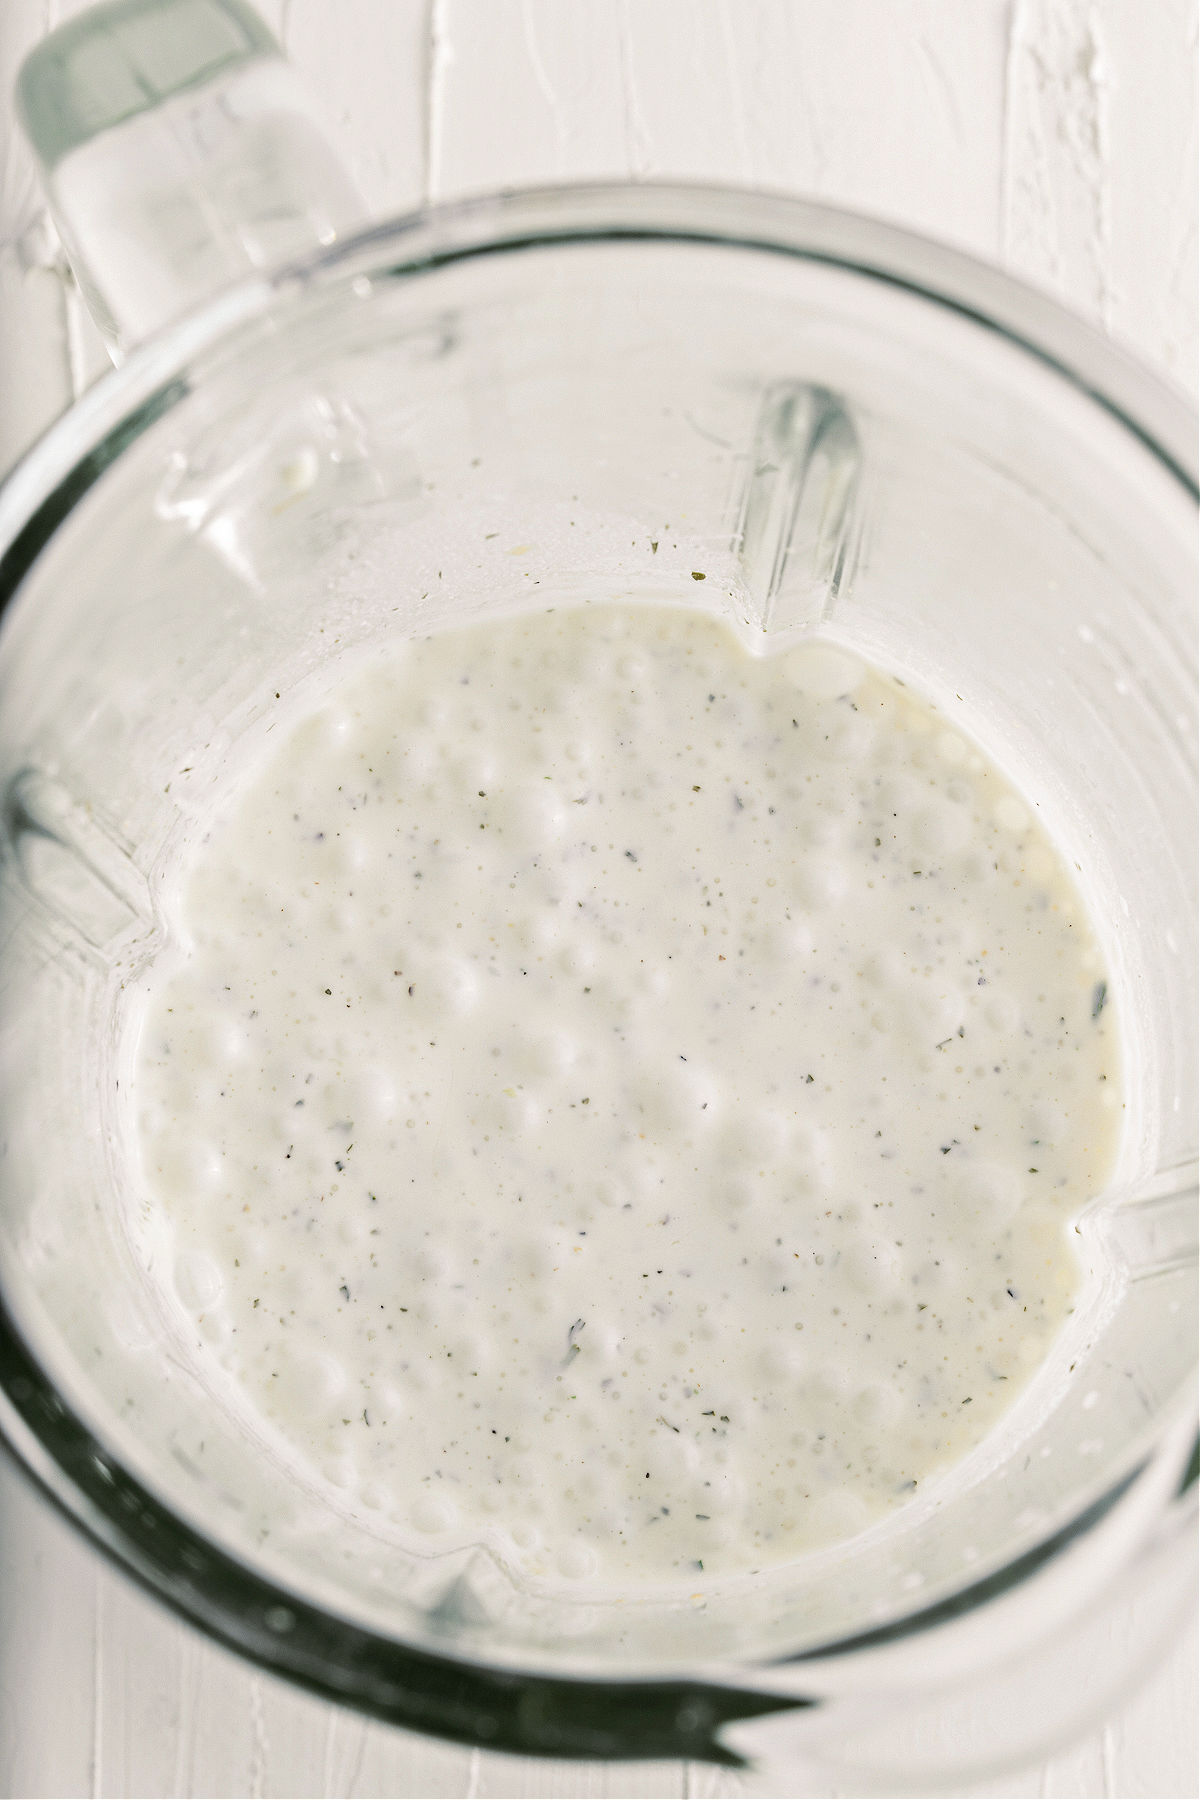 Ranch dressing in a clear glass mixing bowl.